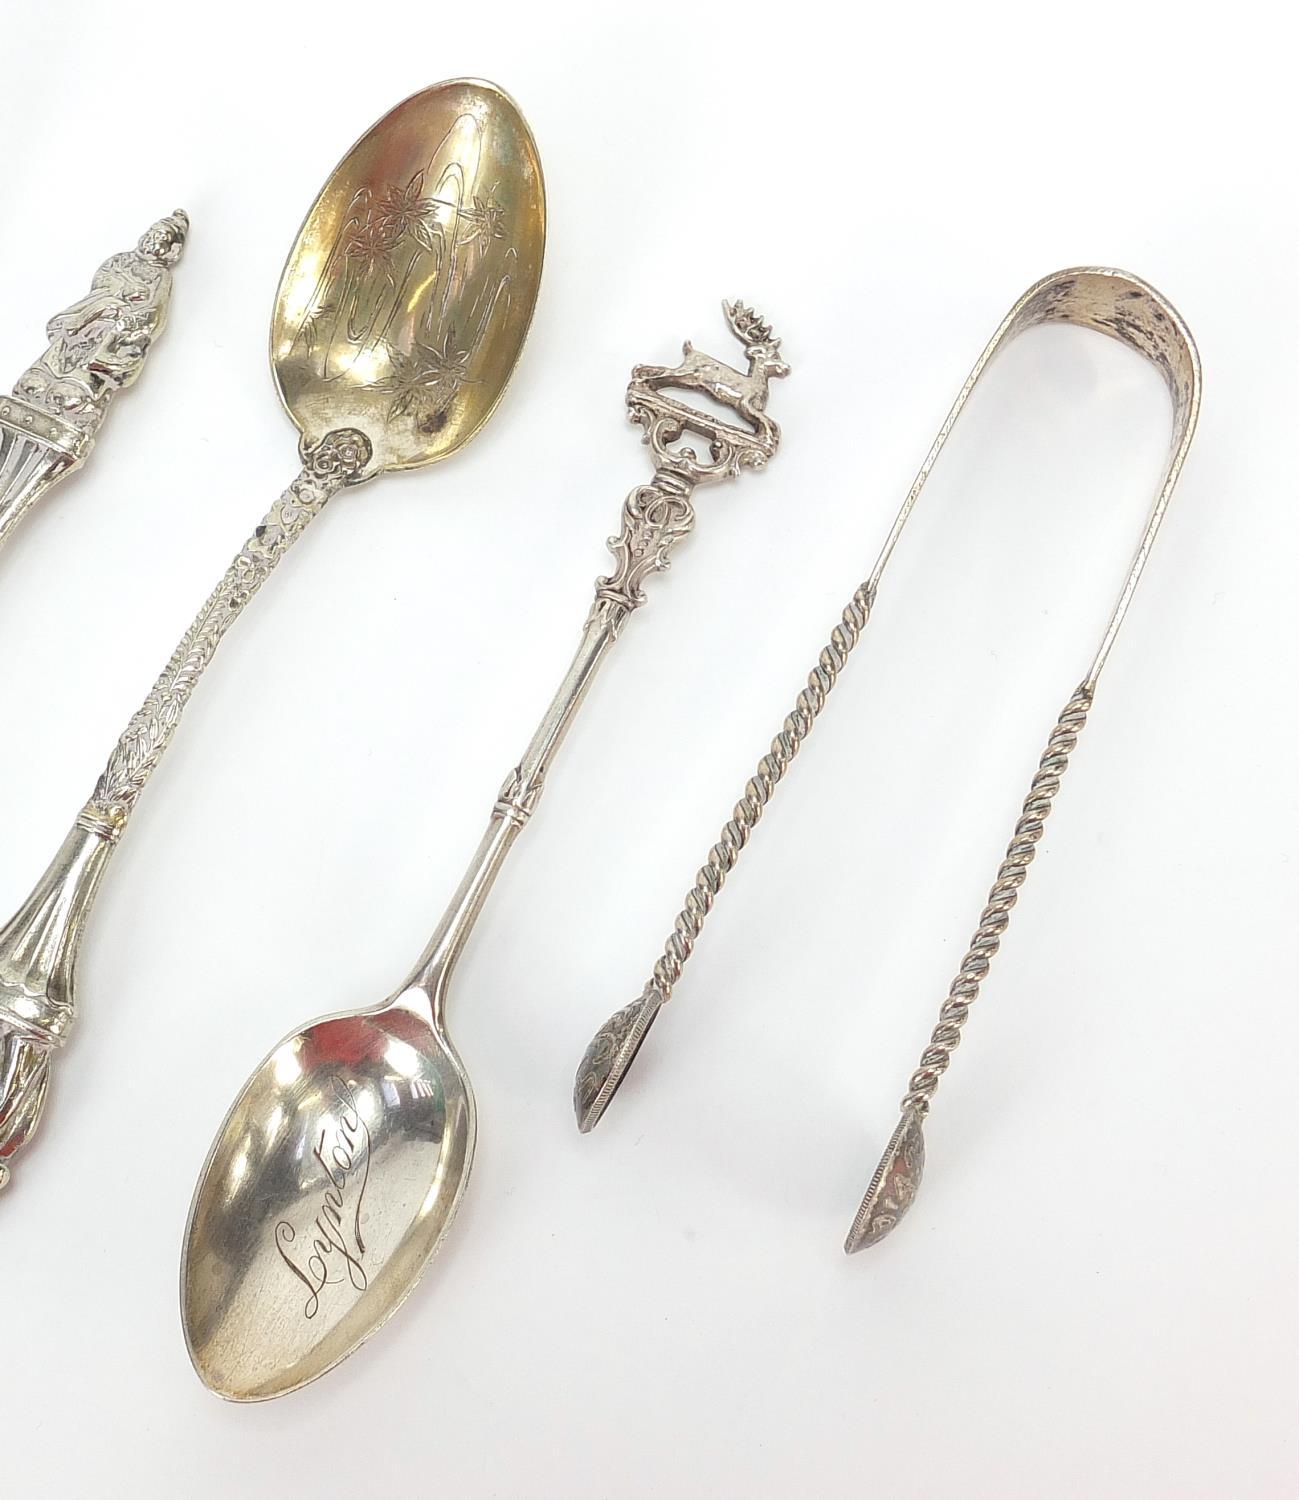 Antique and later silver and white metal flatware including a German silver handled spoon and a pair - Image 3 of 5